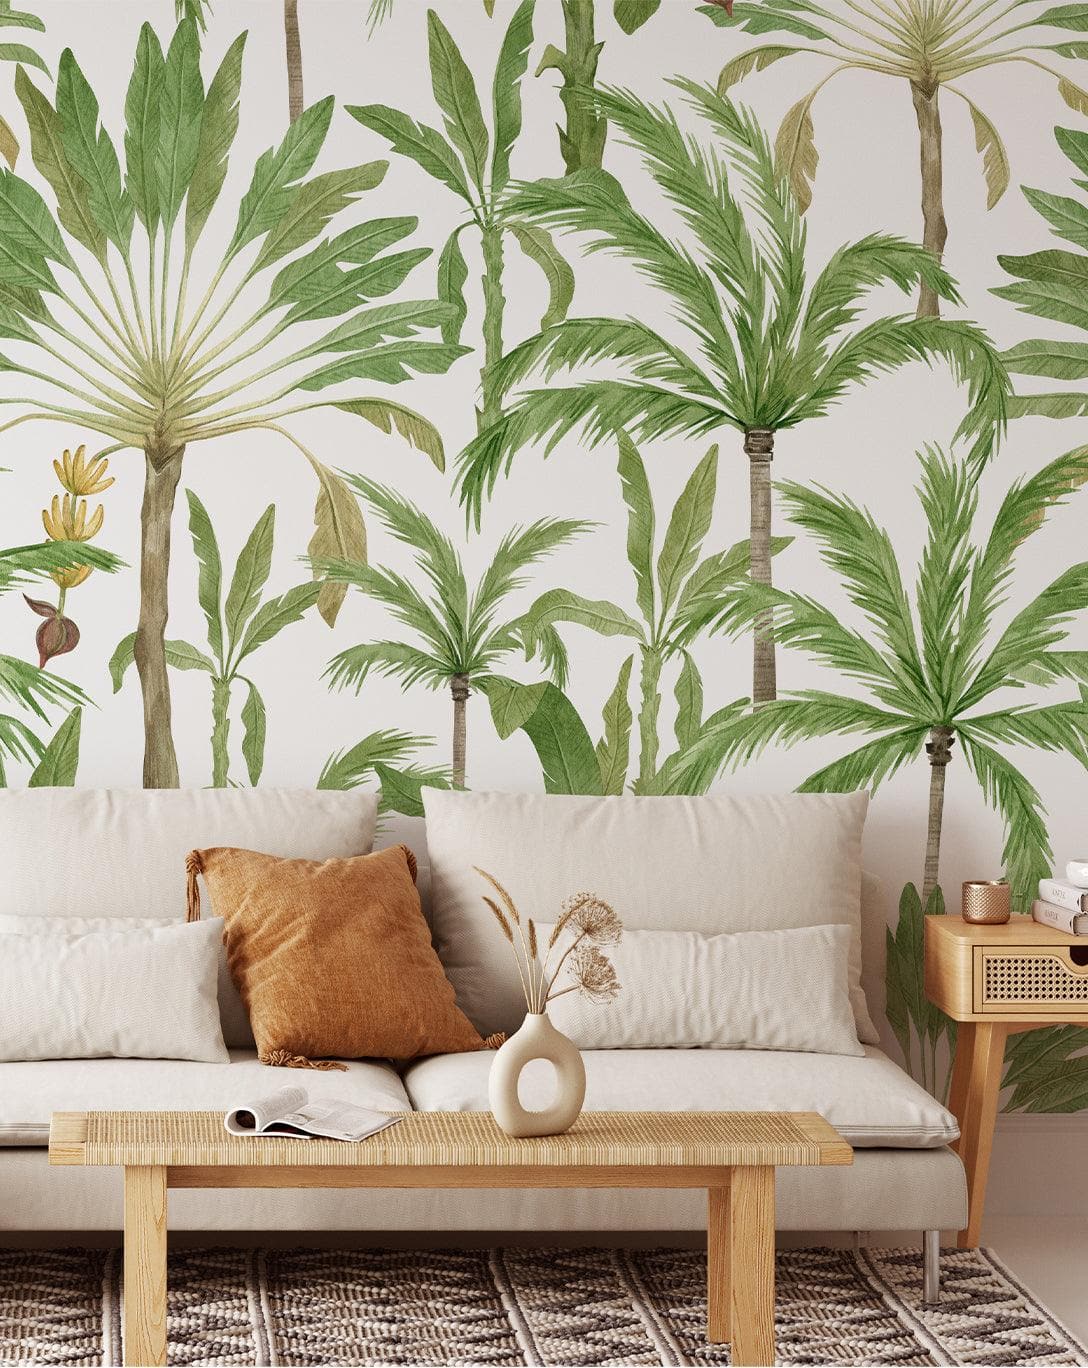 Exotic Palms Tropical Wall Mural Exotic Palms Tropical Wall Mural 